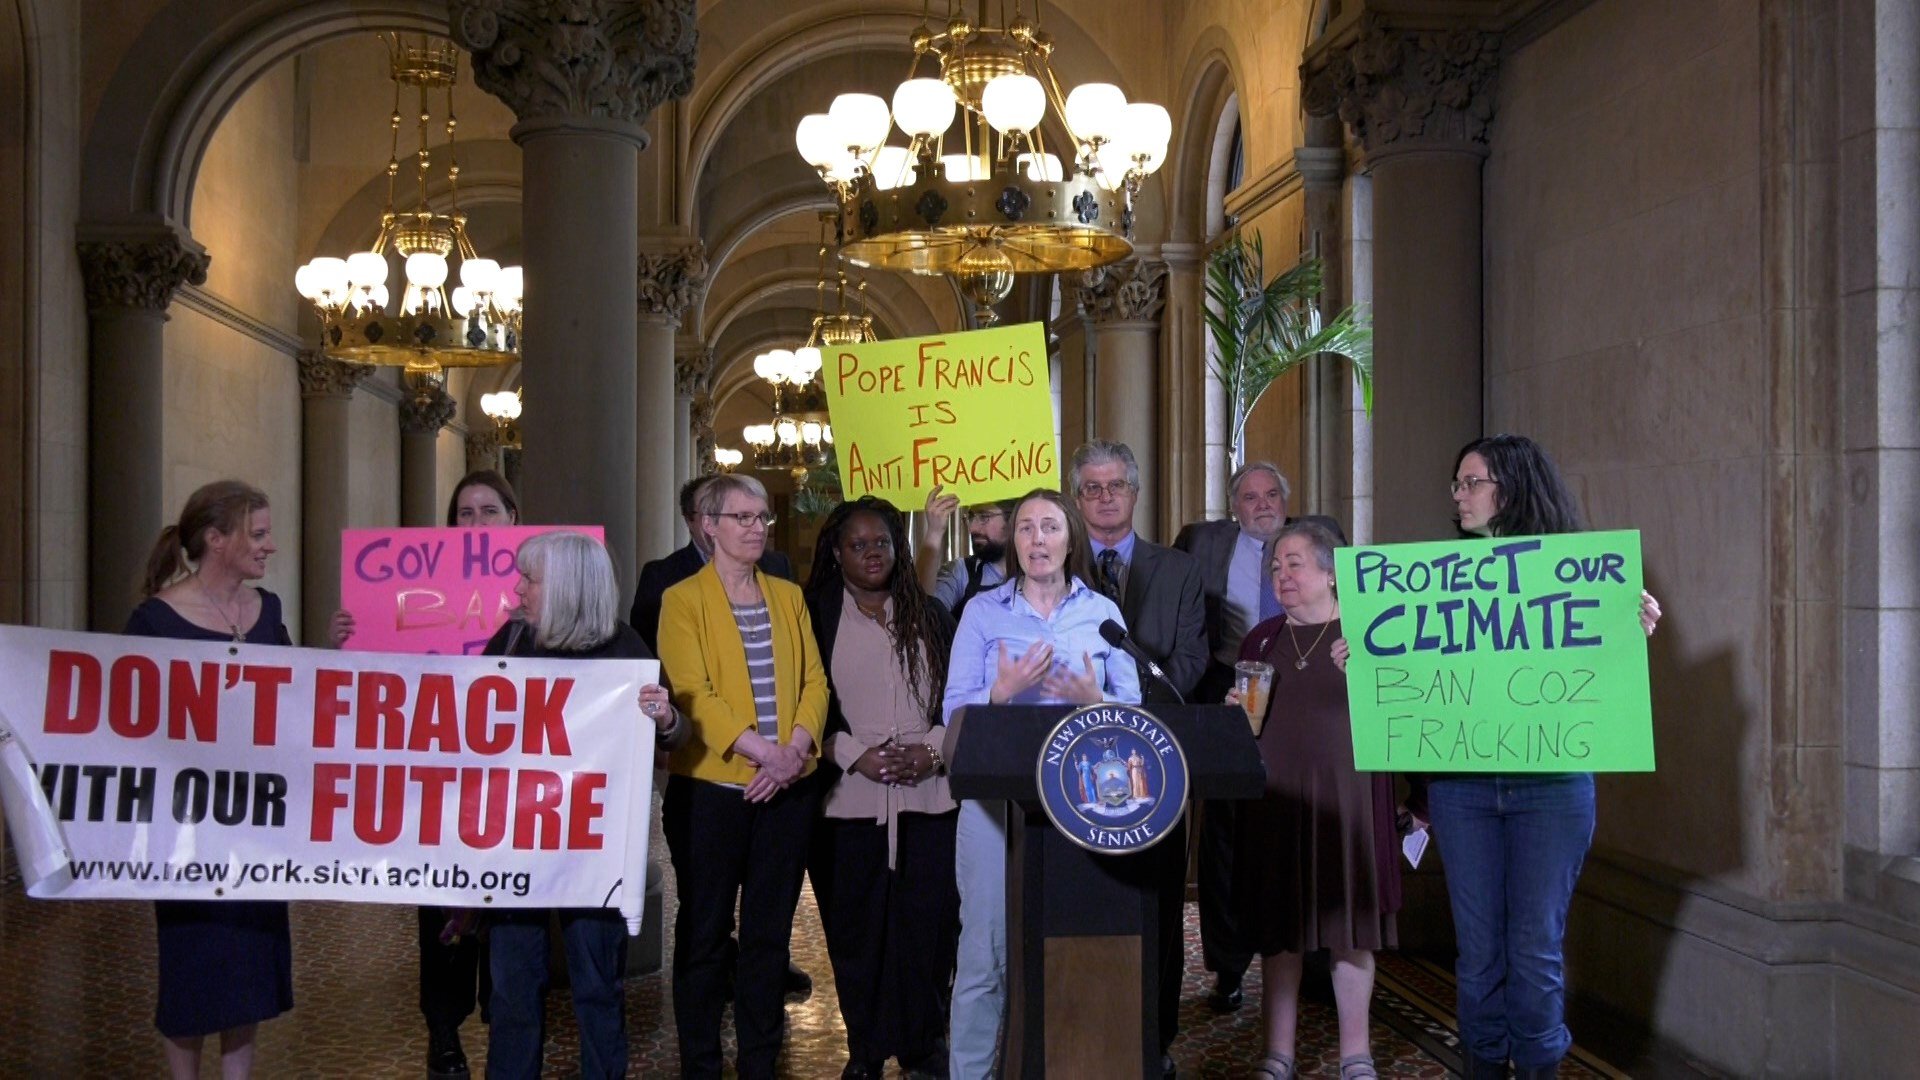 Lawmakers call on the Governor to sign a bill to ban CO2 fracking